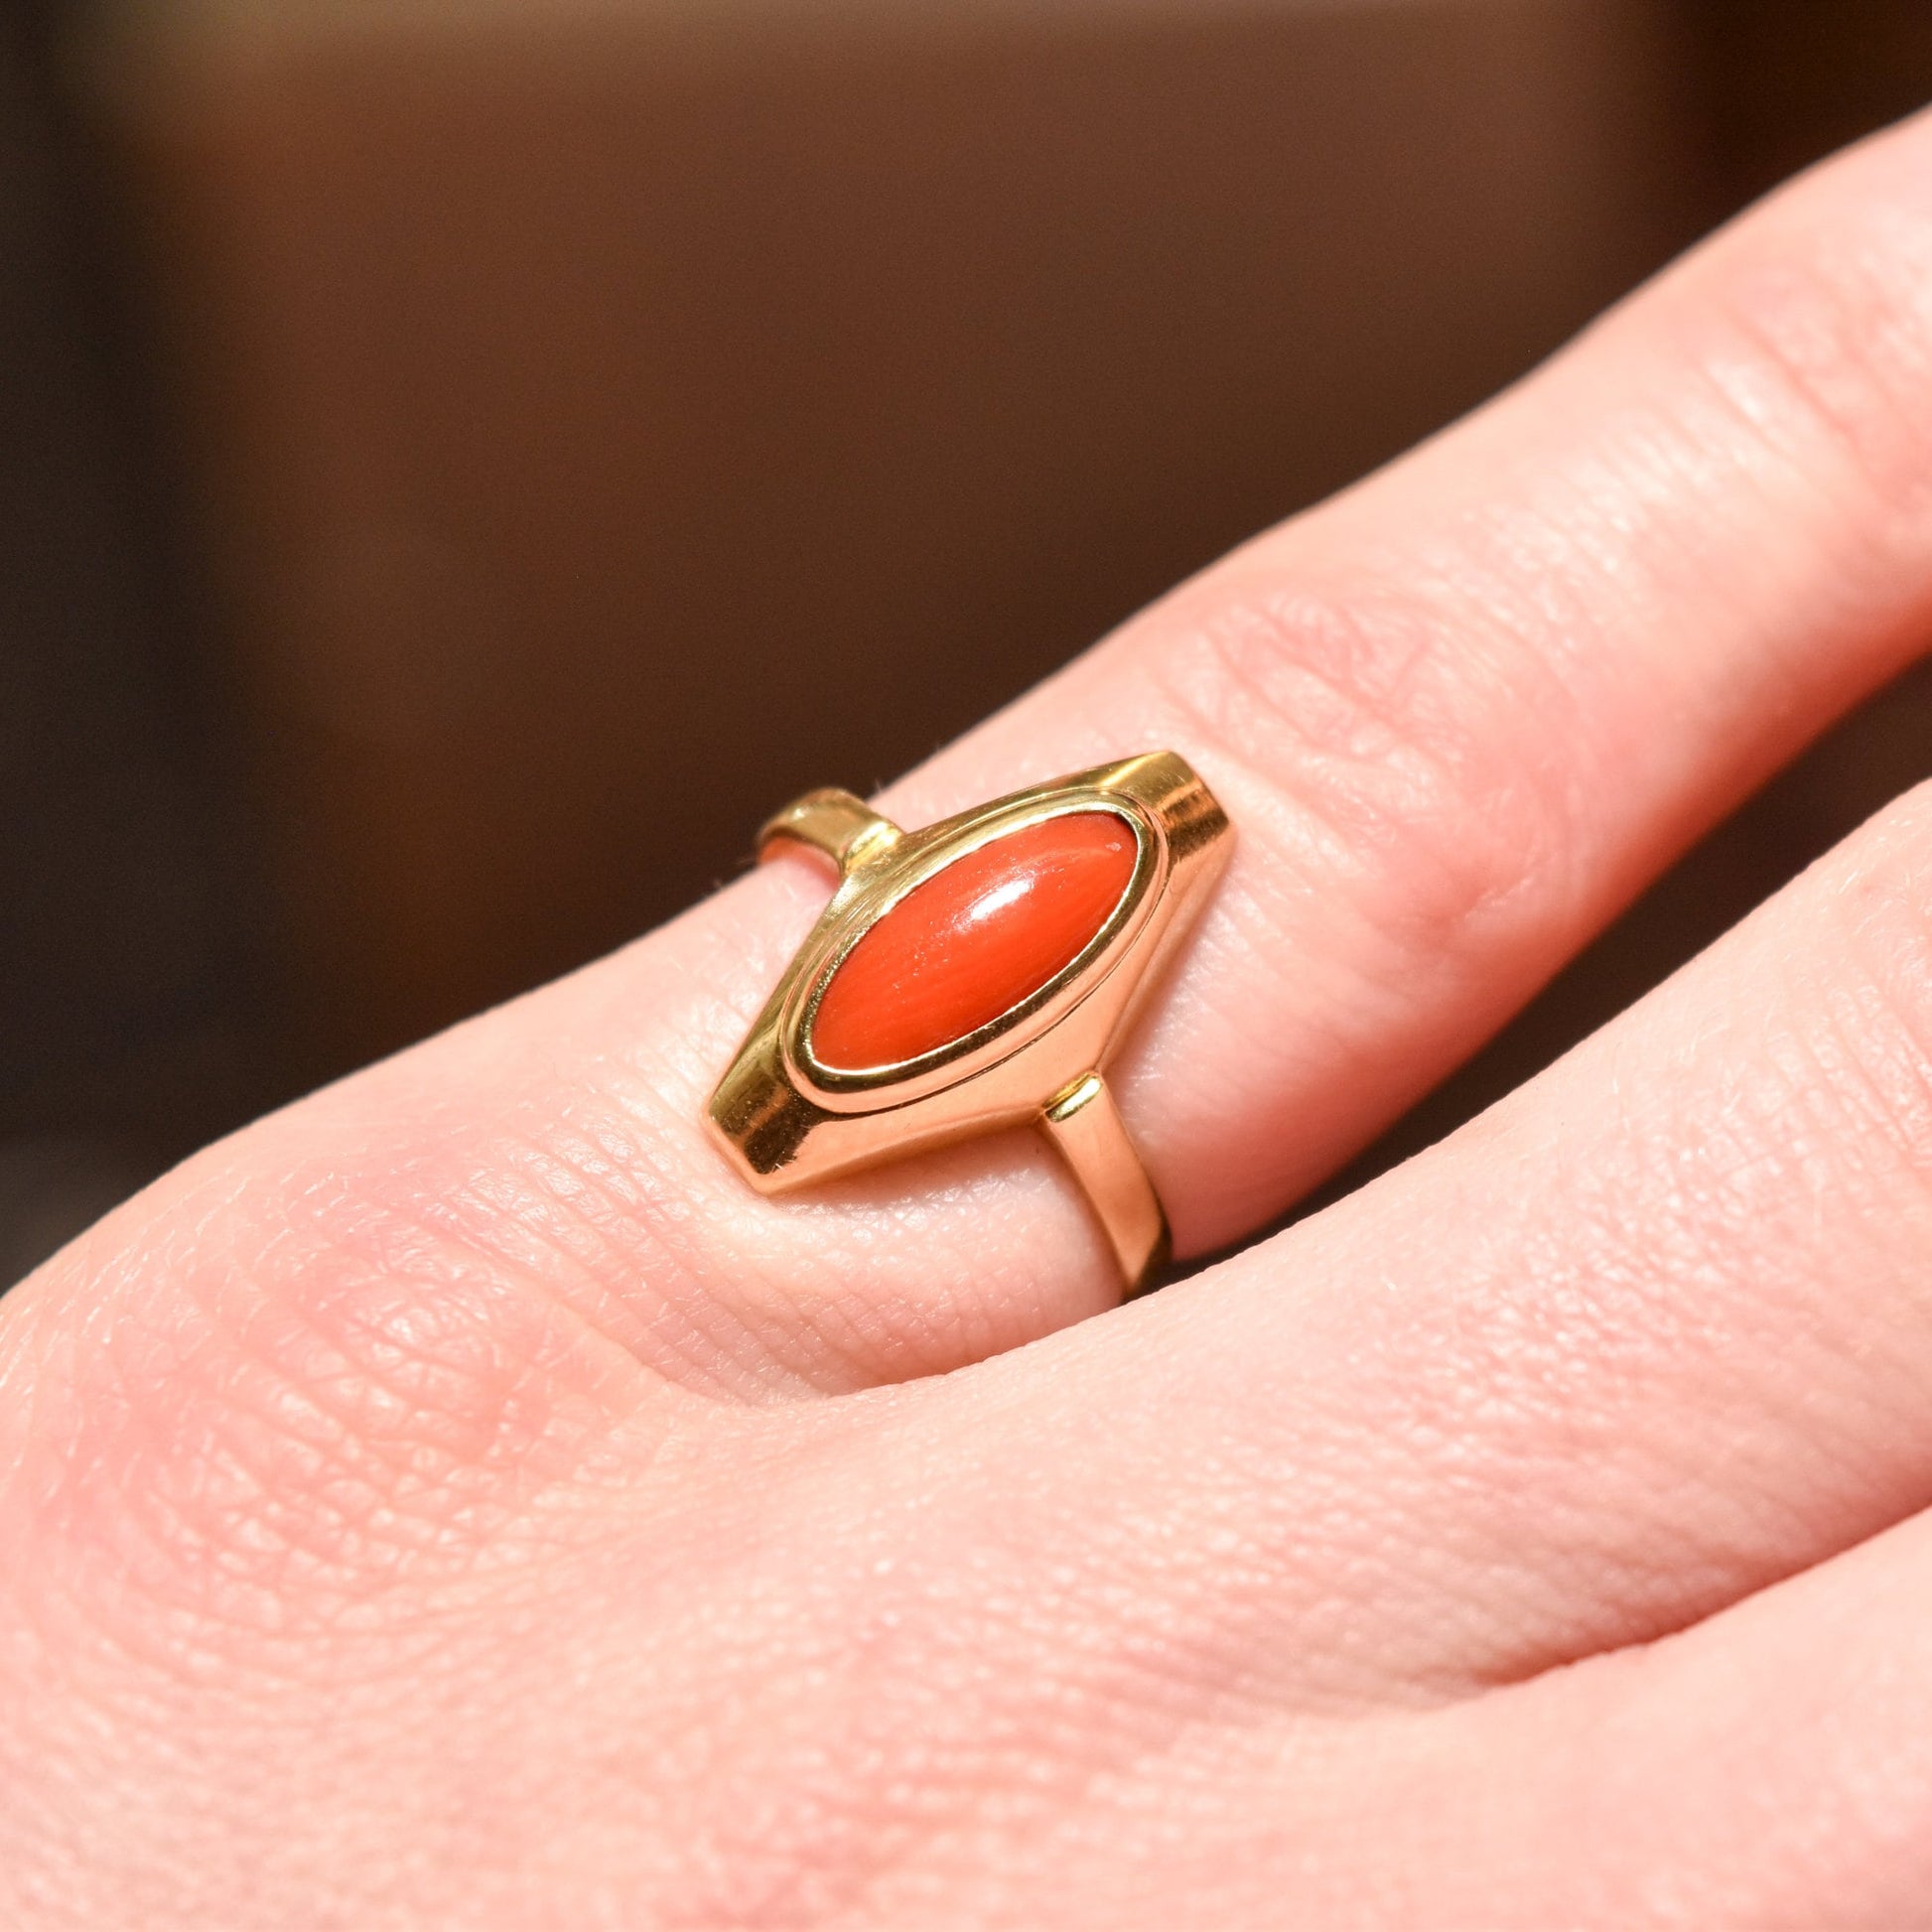 Close-up of a 18K yellow gold ring with marquise-cut red coral on a finger, size 5.25 US.